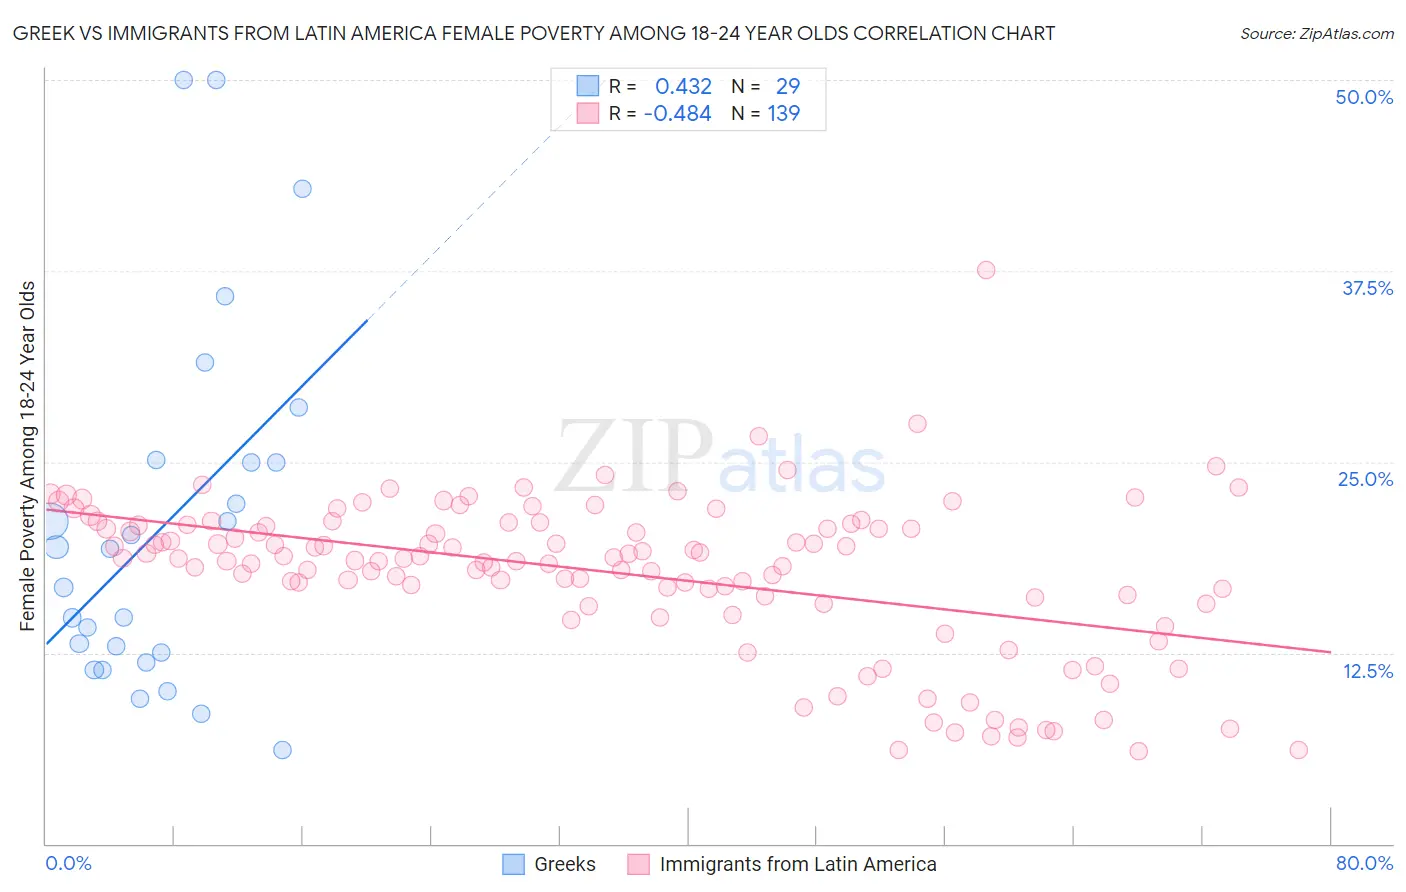 Greek vs Immigrants from Latin America Female Poverty Among 18-24 Year Olds